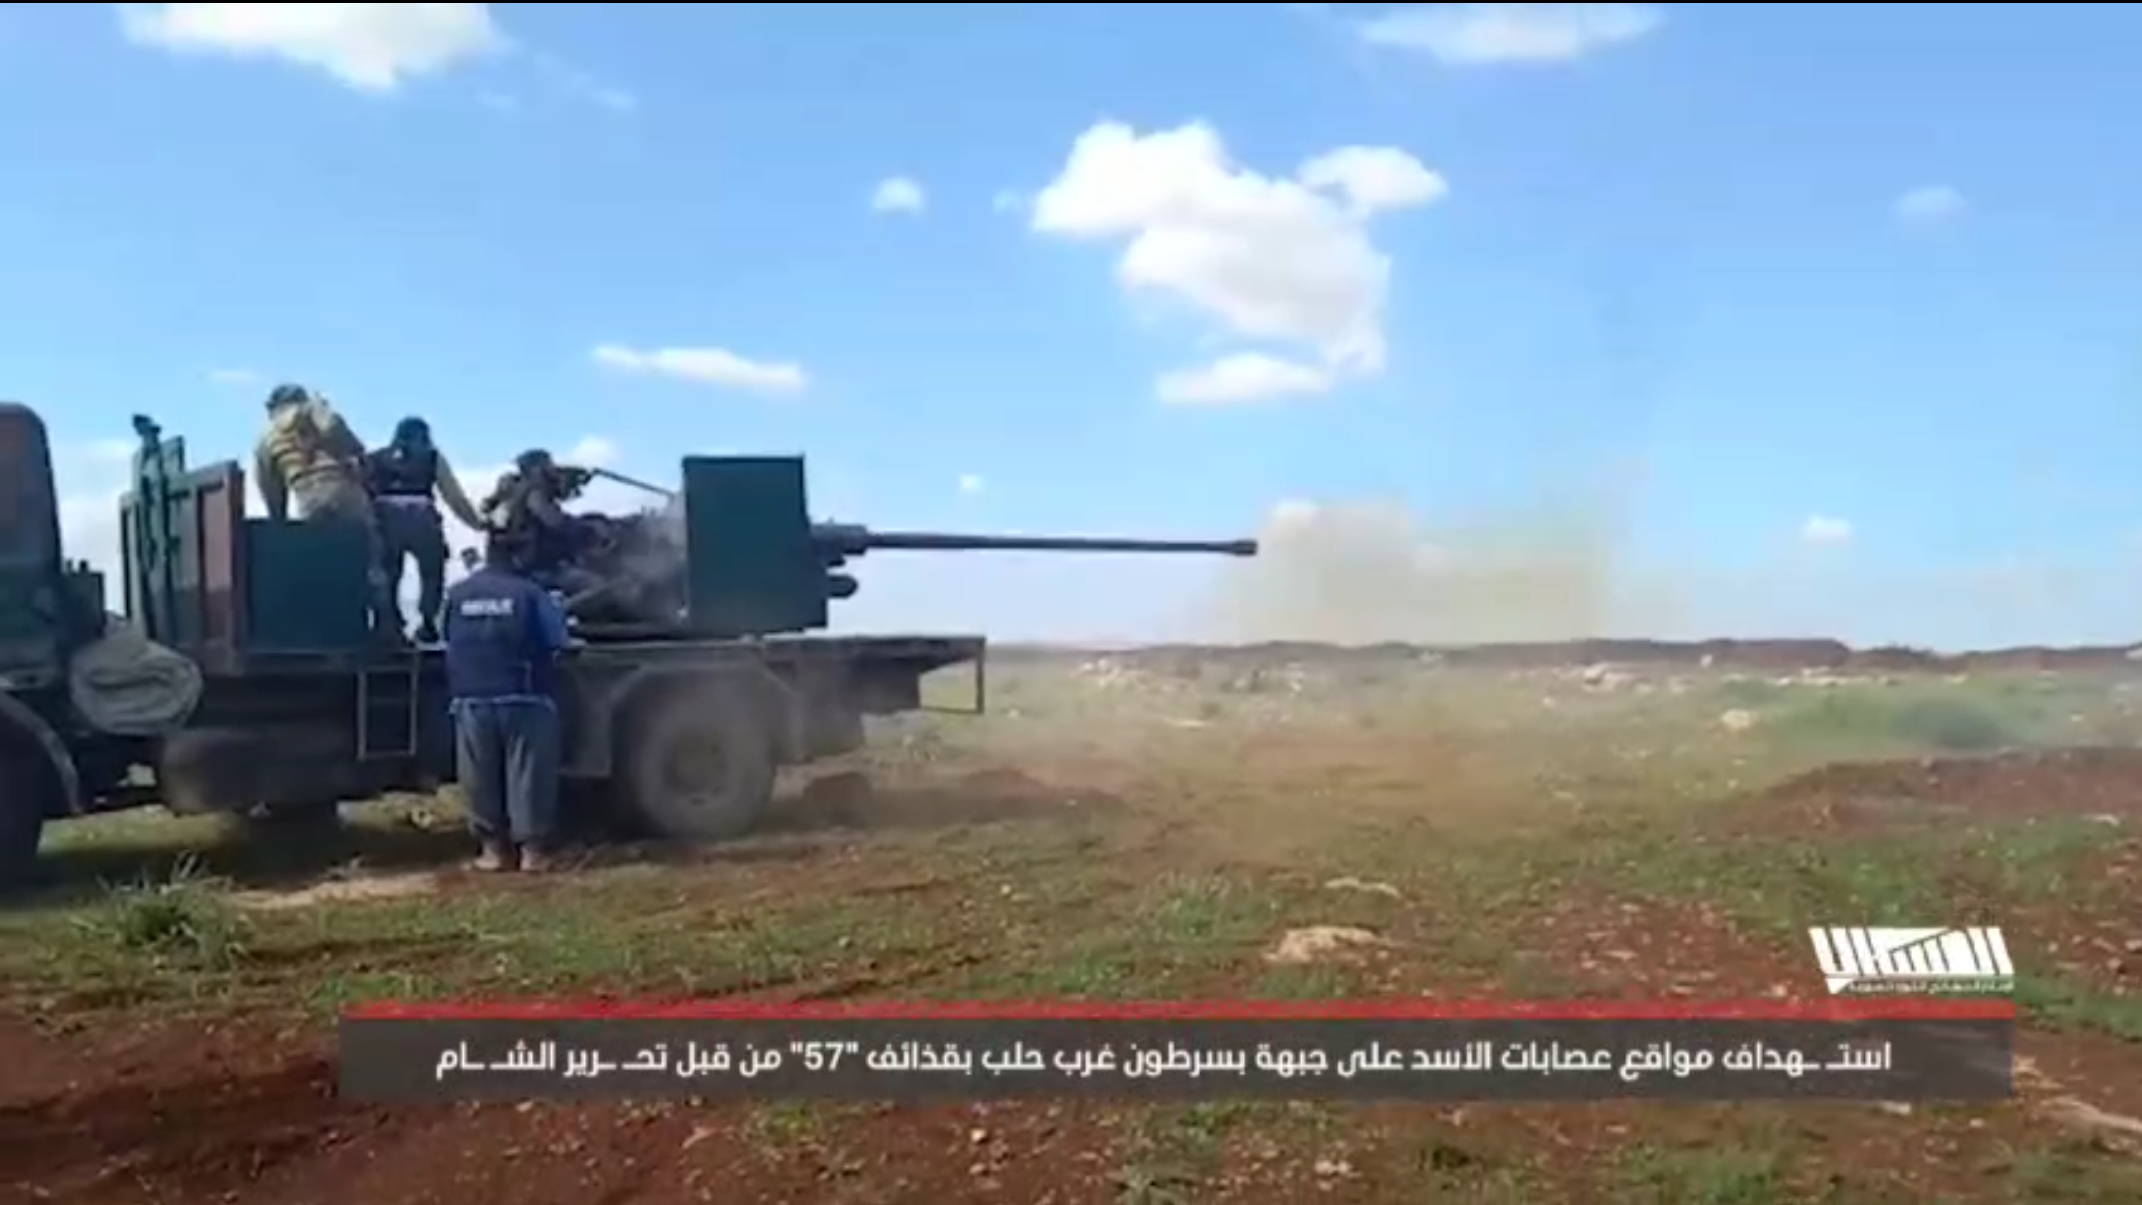 (Video) Hayy'at Tahrir al-Sham (HTS) Targeted Syrian Forces With "57" Missiles on Bastaron Front, Southern Aleppo, Syria - 4 April 2023